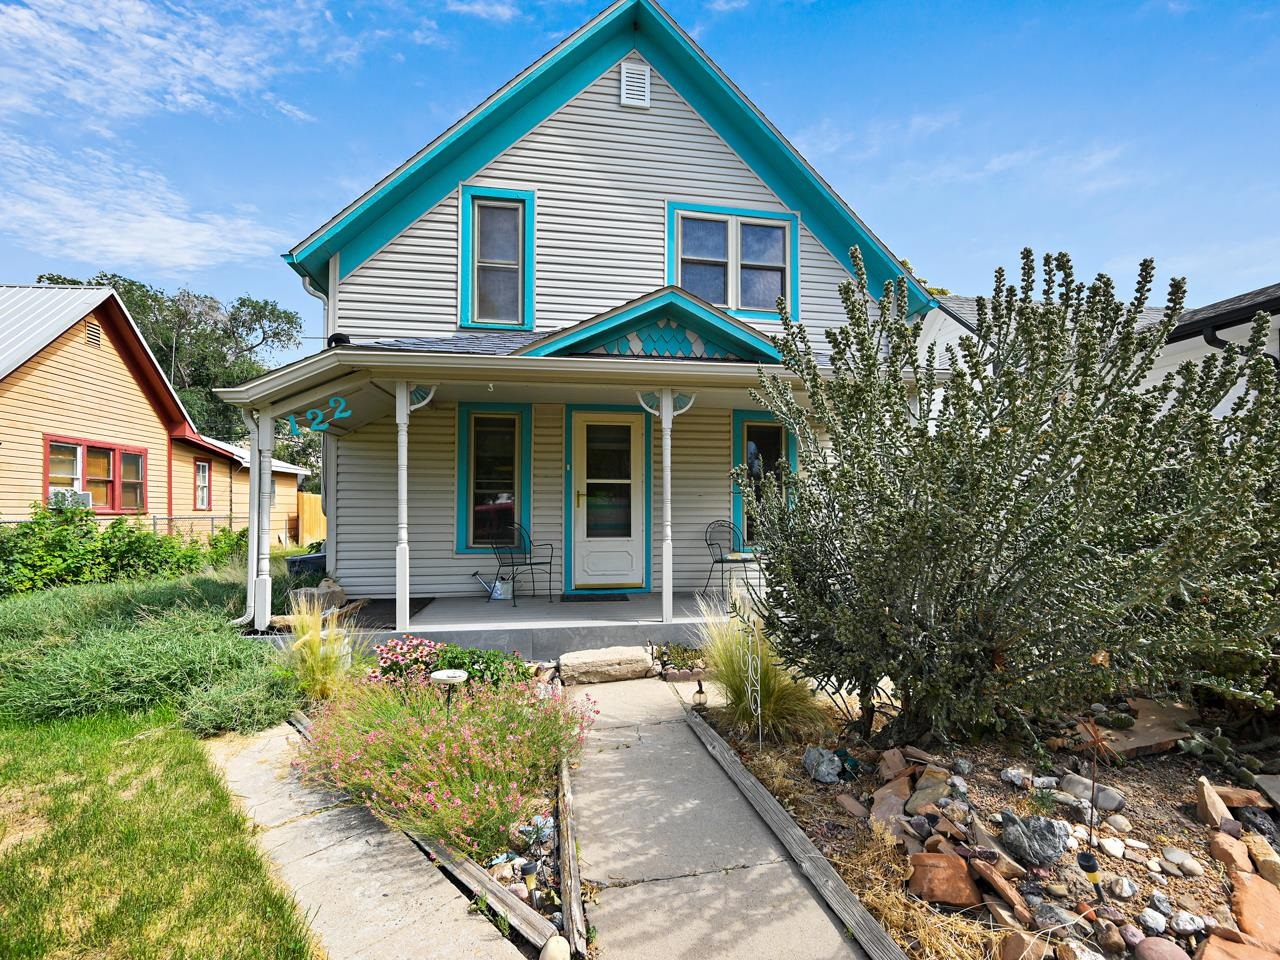 This is an incredible opportunity to live in historic downtown Palisade! Just off Main St, this beautiful, early 1900's home is located close to all the excitement in this corner of the Grand Valley. Inside you'll find the original hardwood floors throughout much of the main level of the home, charming vintage details such as crown molding, wide window frames, and a claw foot tub in the main bathroom, and upstairs you'll find a large living space, bedroom, and walk in closet with plentiful natural light. The basement has a large space for storage, working out, and the laundry room. The surrounding yard is large with some landscaping and grassy areas. In the back you'll find a patio with a pergola frame, mature tree, and an old carriage house that has plenty of room for tools, toys, and projects. Close to parks, shopping, dining, local breweries, distilleries and wineries, schools, and adventure, this is a fantastic home base for anyone looking to settle into a Western Colorado lifestyle!